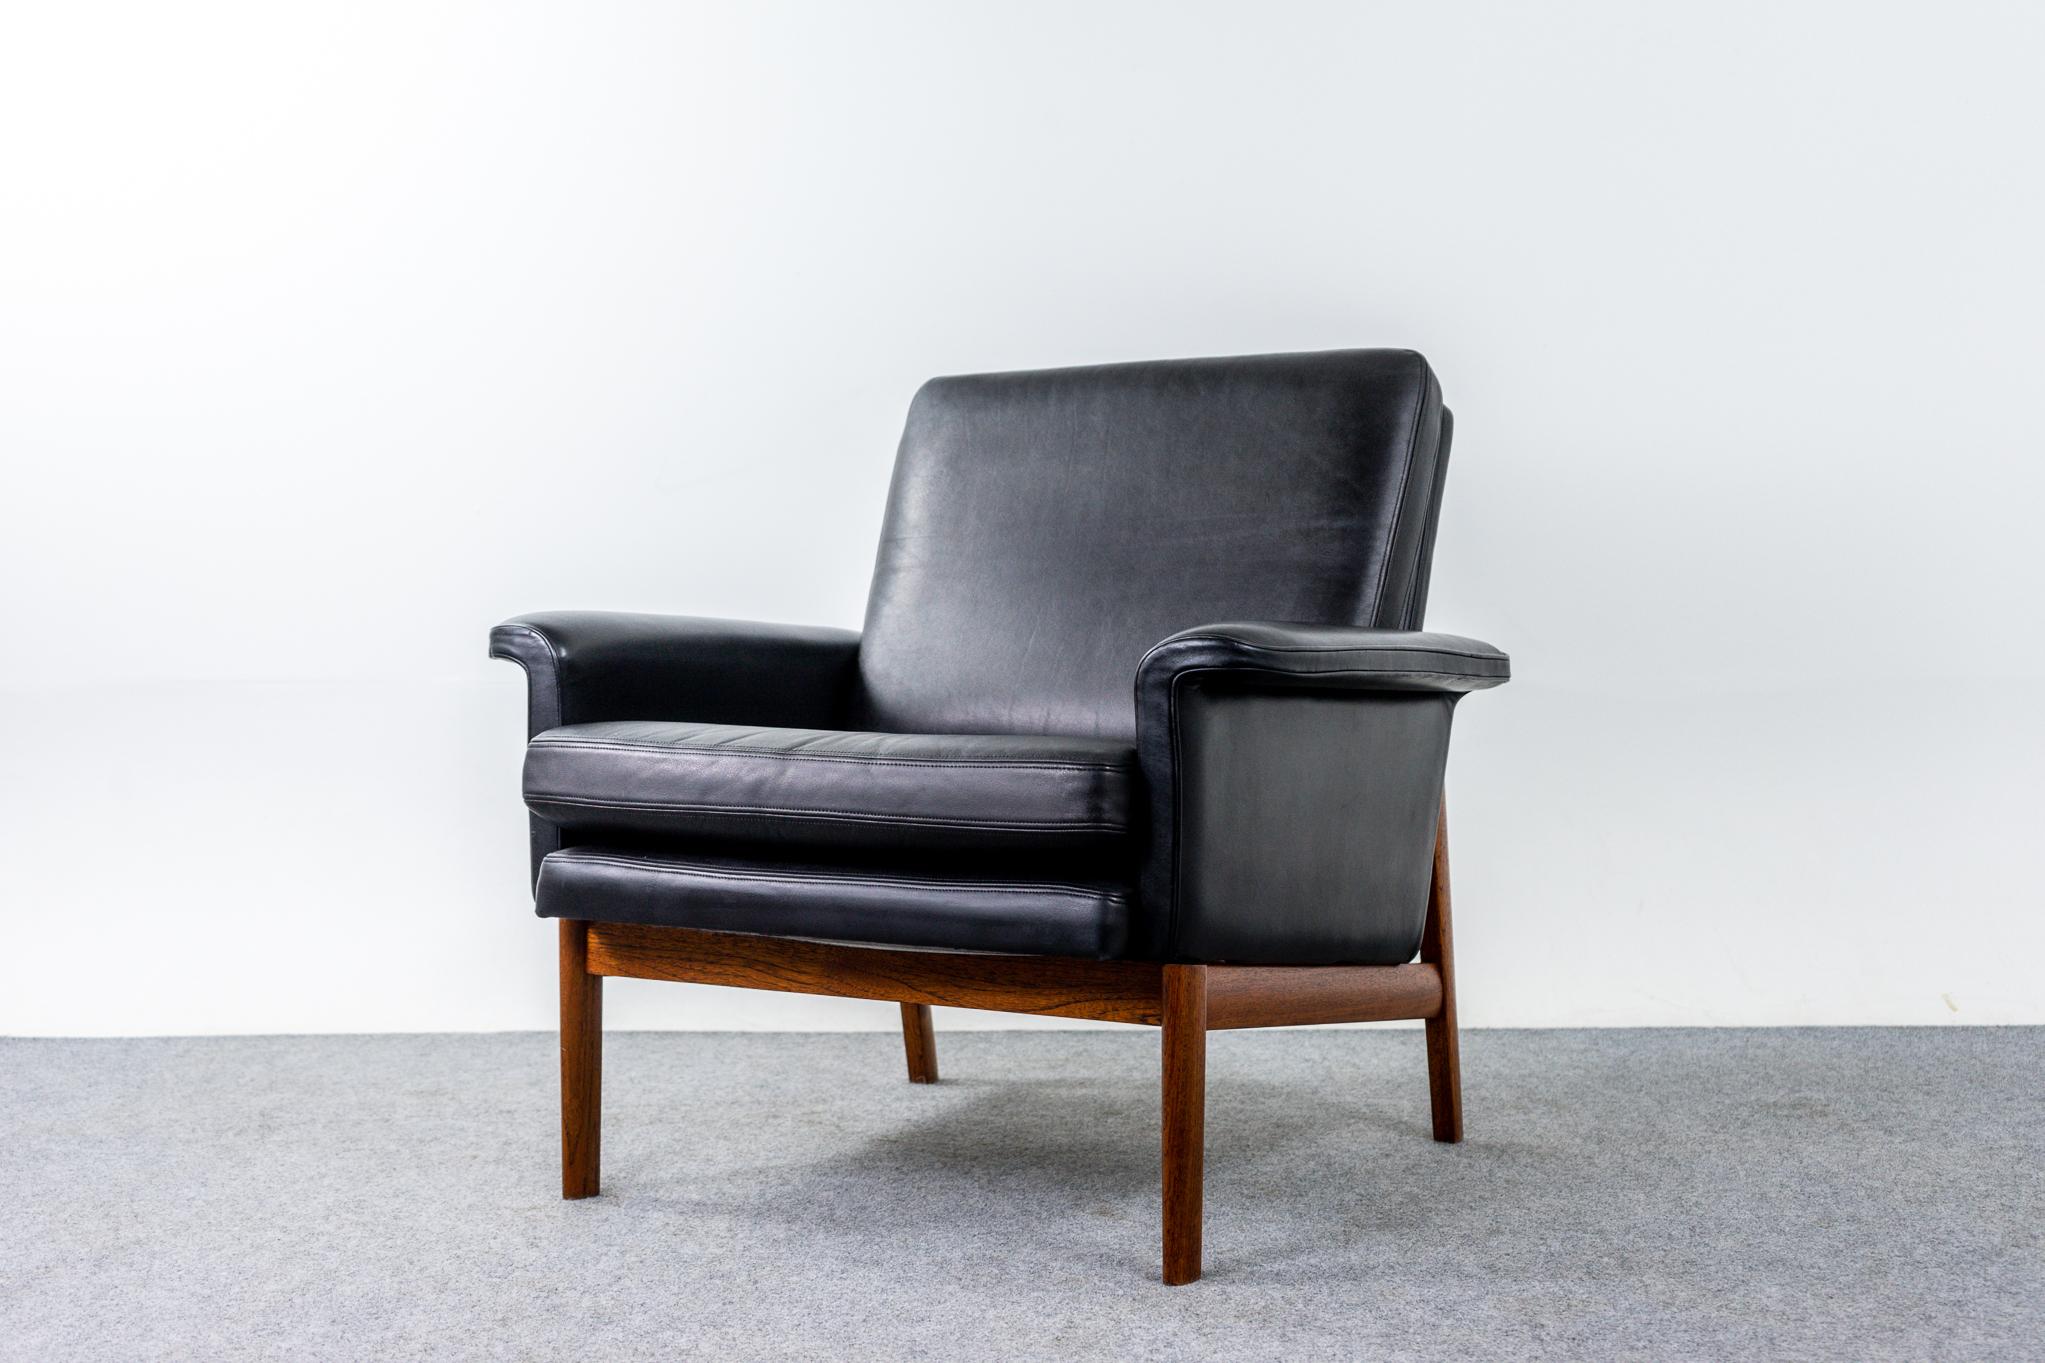 Leather and teak Danish model 218 Jupiter chair by Finn Juhl for France & Son, circa 1960's. Iconic chair features beautiful pitch black leather with perfect patina. Elegant teak base contrasts beautifully with the upholstery. Perfectly angled for